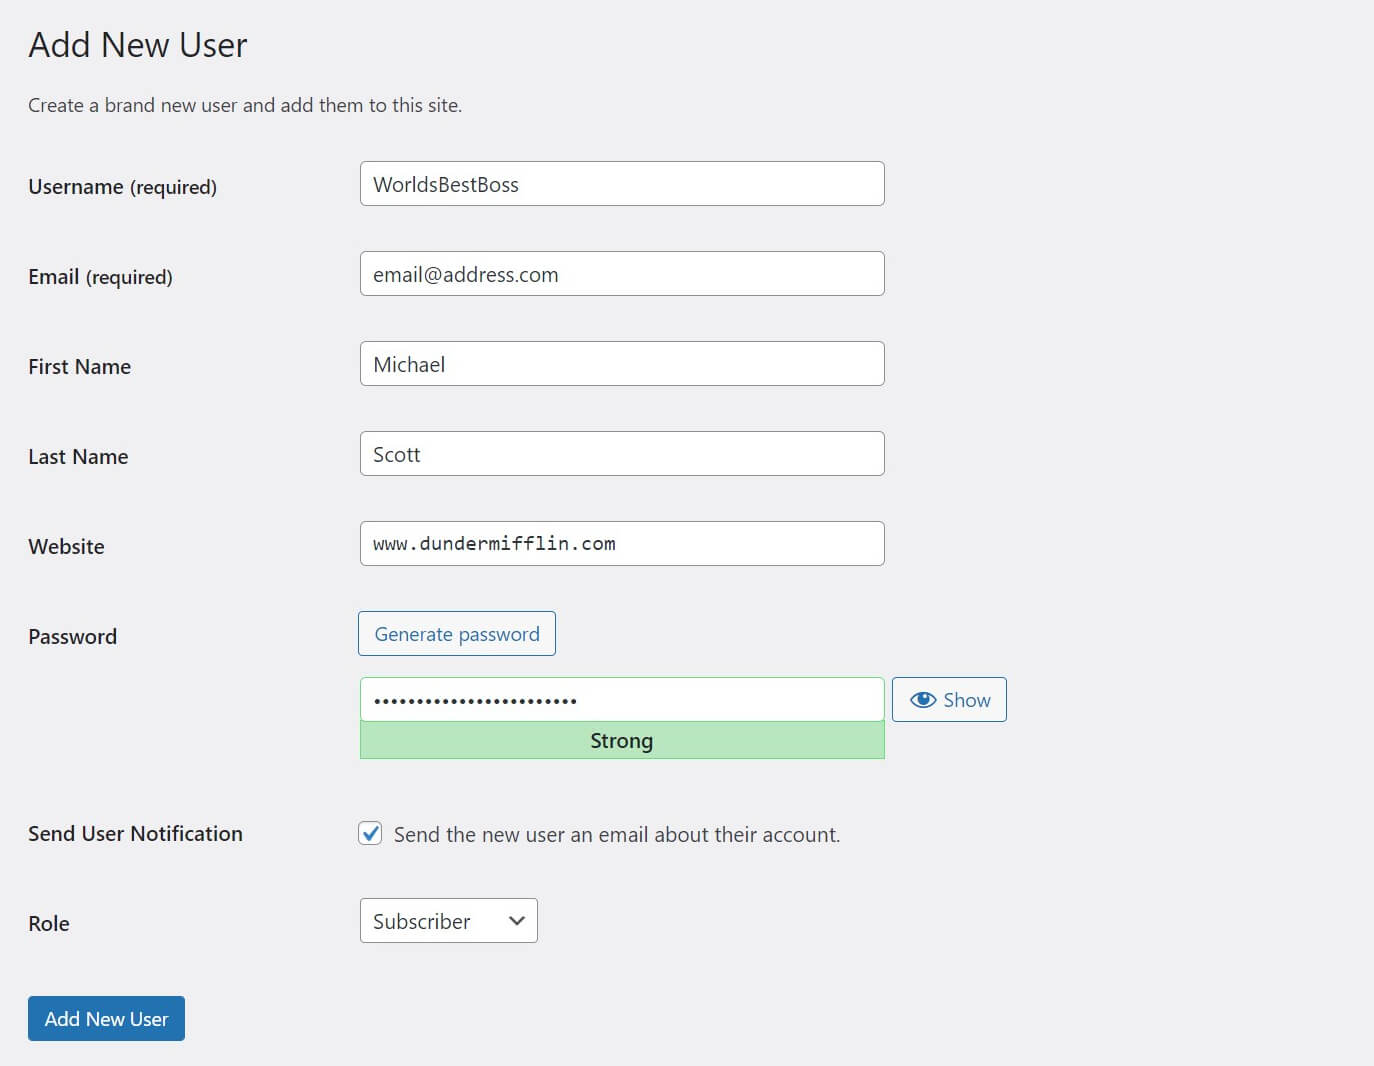 The completed new user form in WordPress.